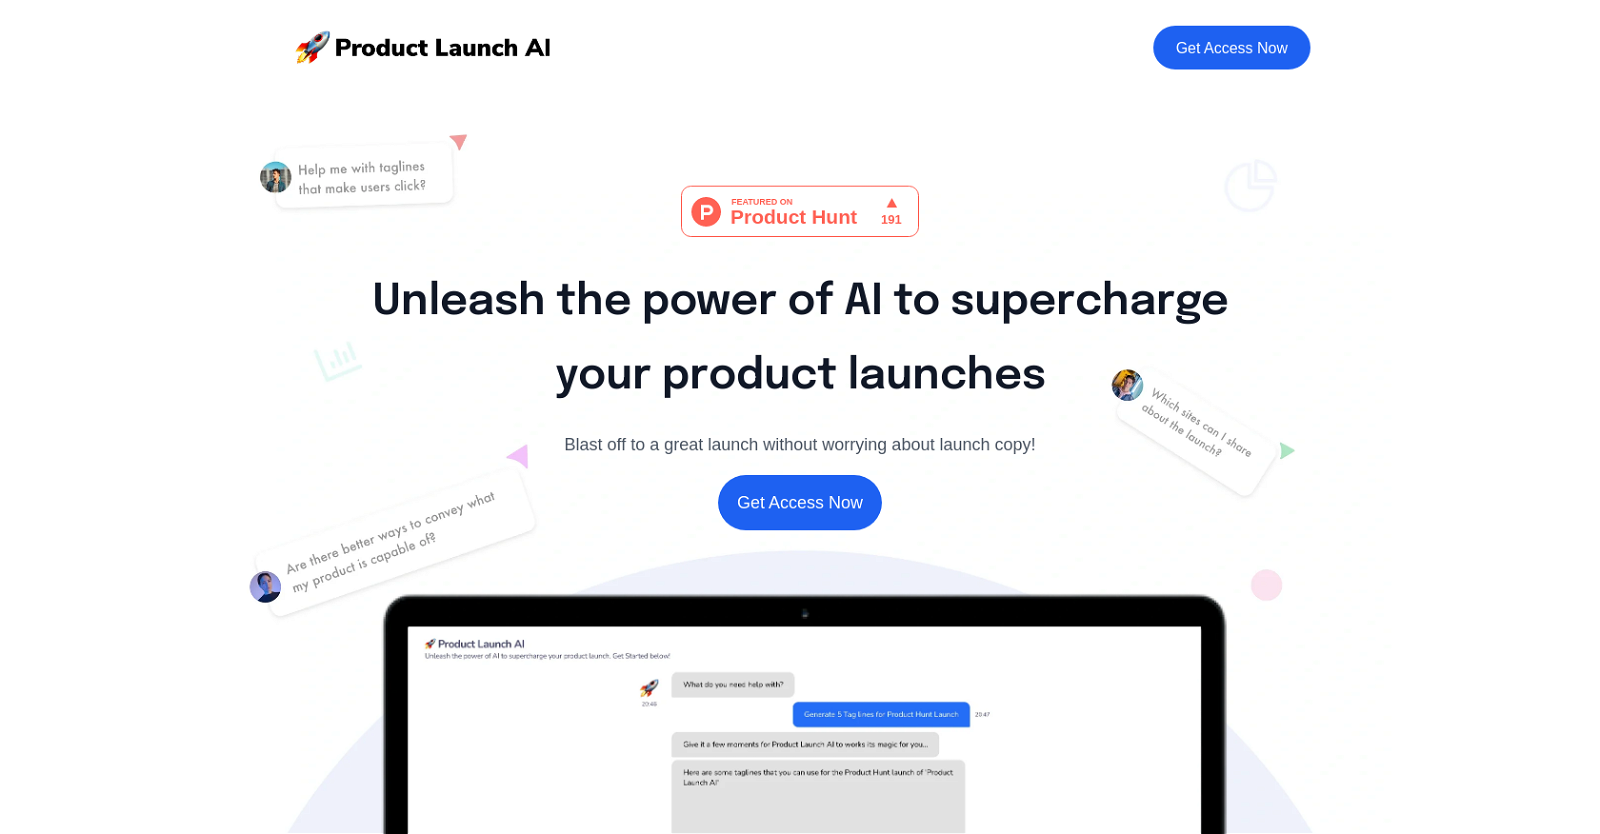 Product Launch AI website